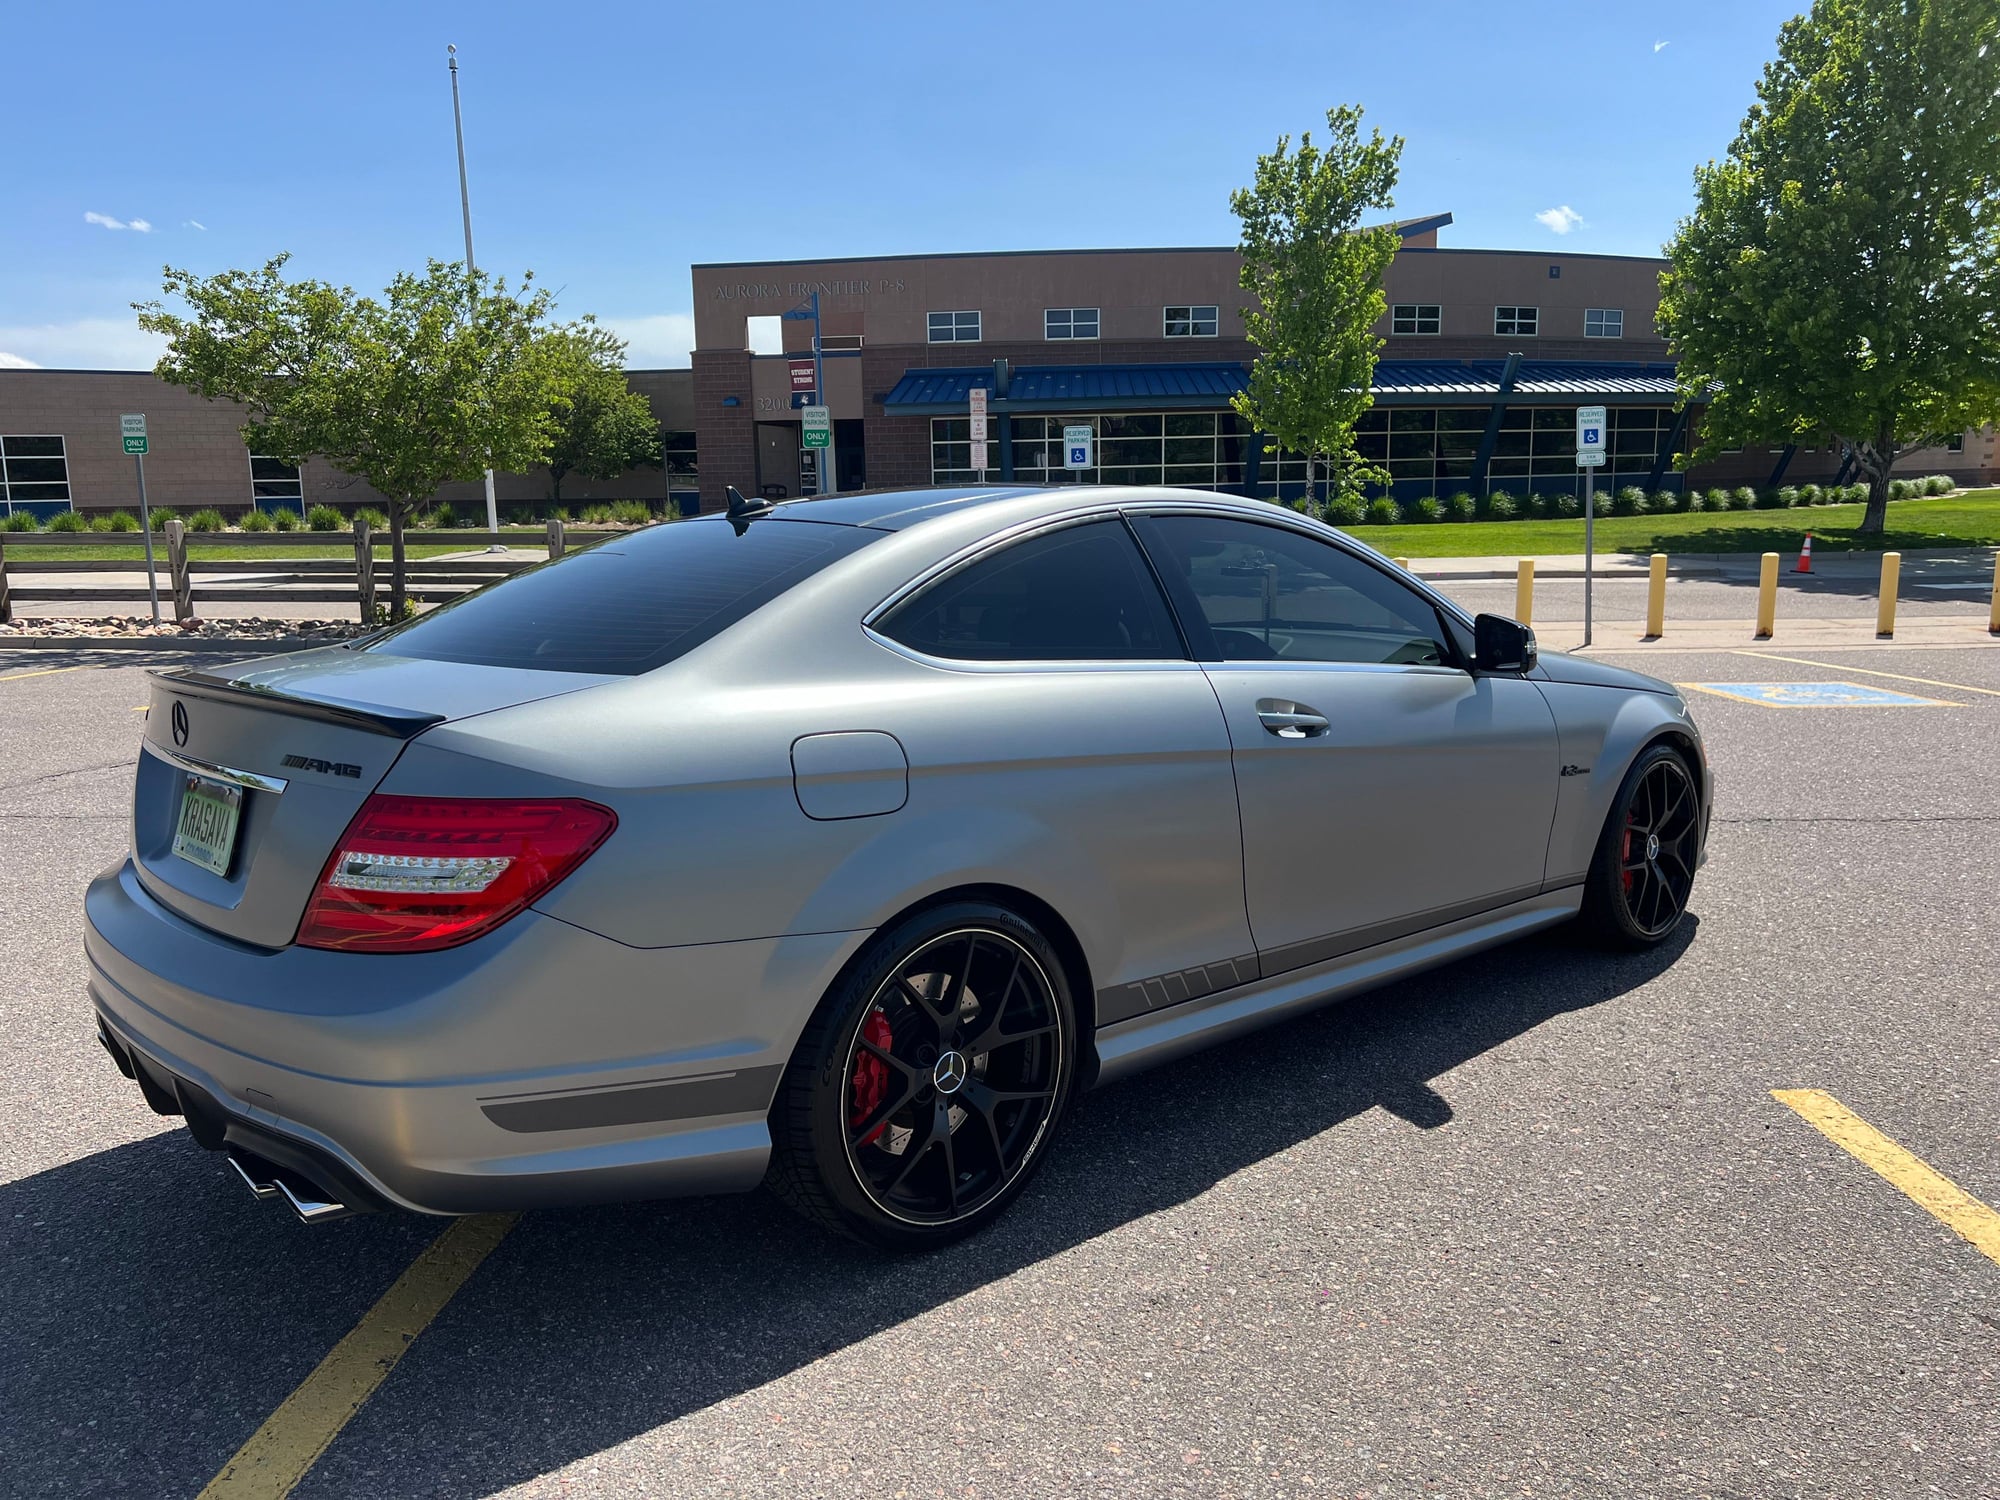 2014 Mercedes-Benz C63 AMG - 2014 Mercedes-Benz C63 AMG 507 Edition Magno w/ Limited Slip... - Used - VIN WDDGJ7HB9EG266583 - 63,500 Miles - 8 cyl - 2WD - Automatic - Coupe - Gray - Aurora, CO 80014, United States